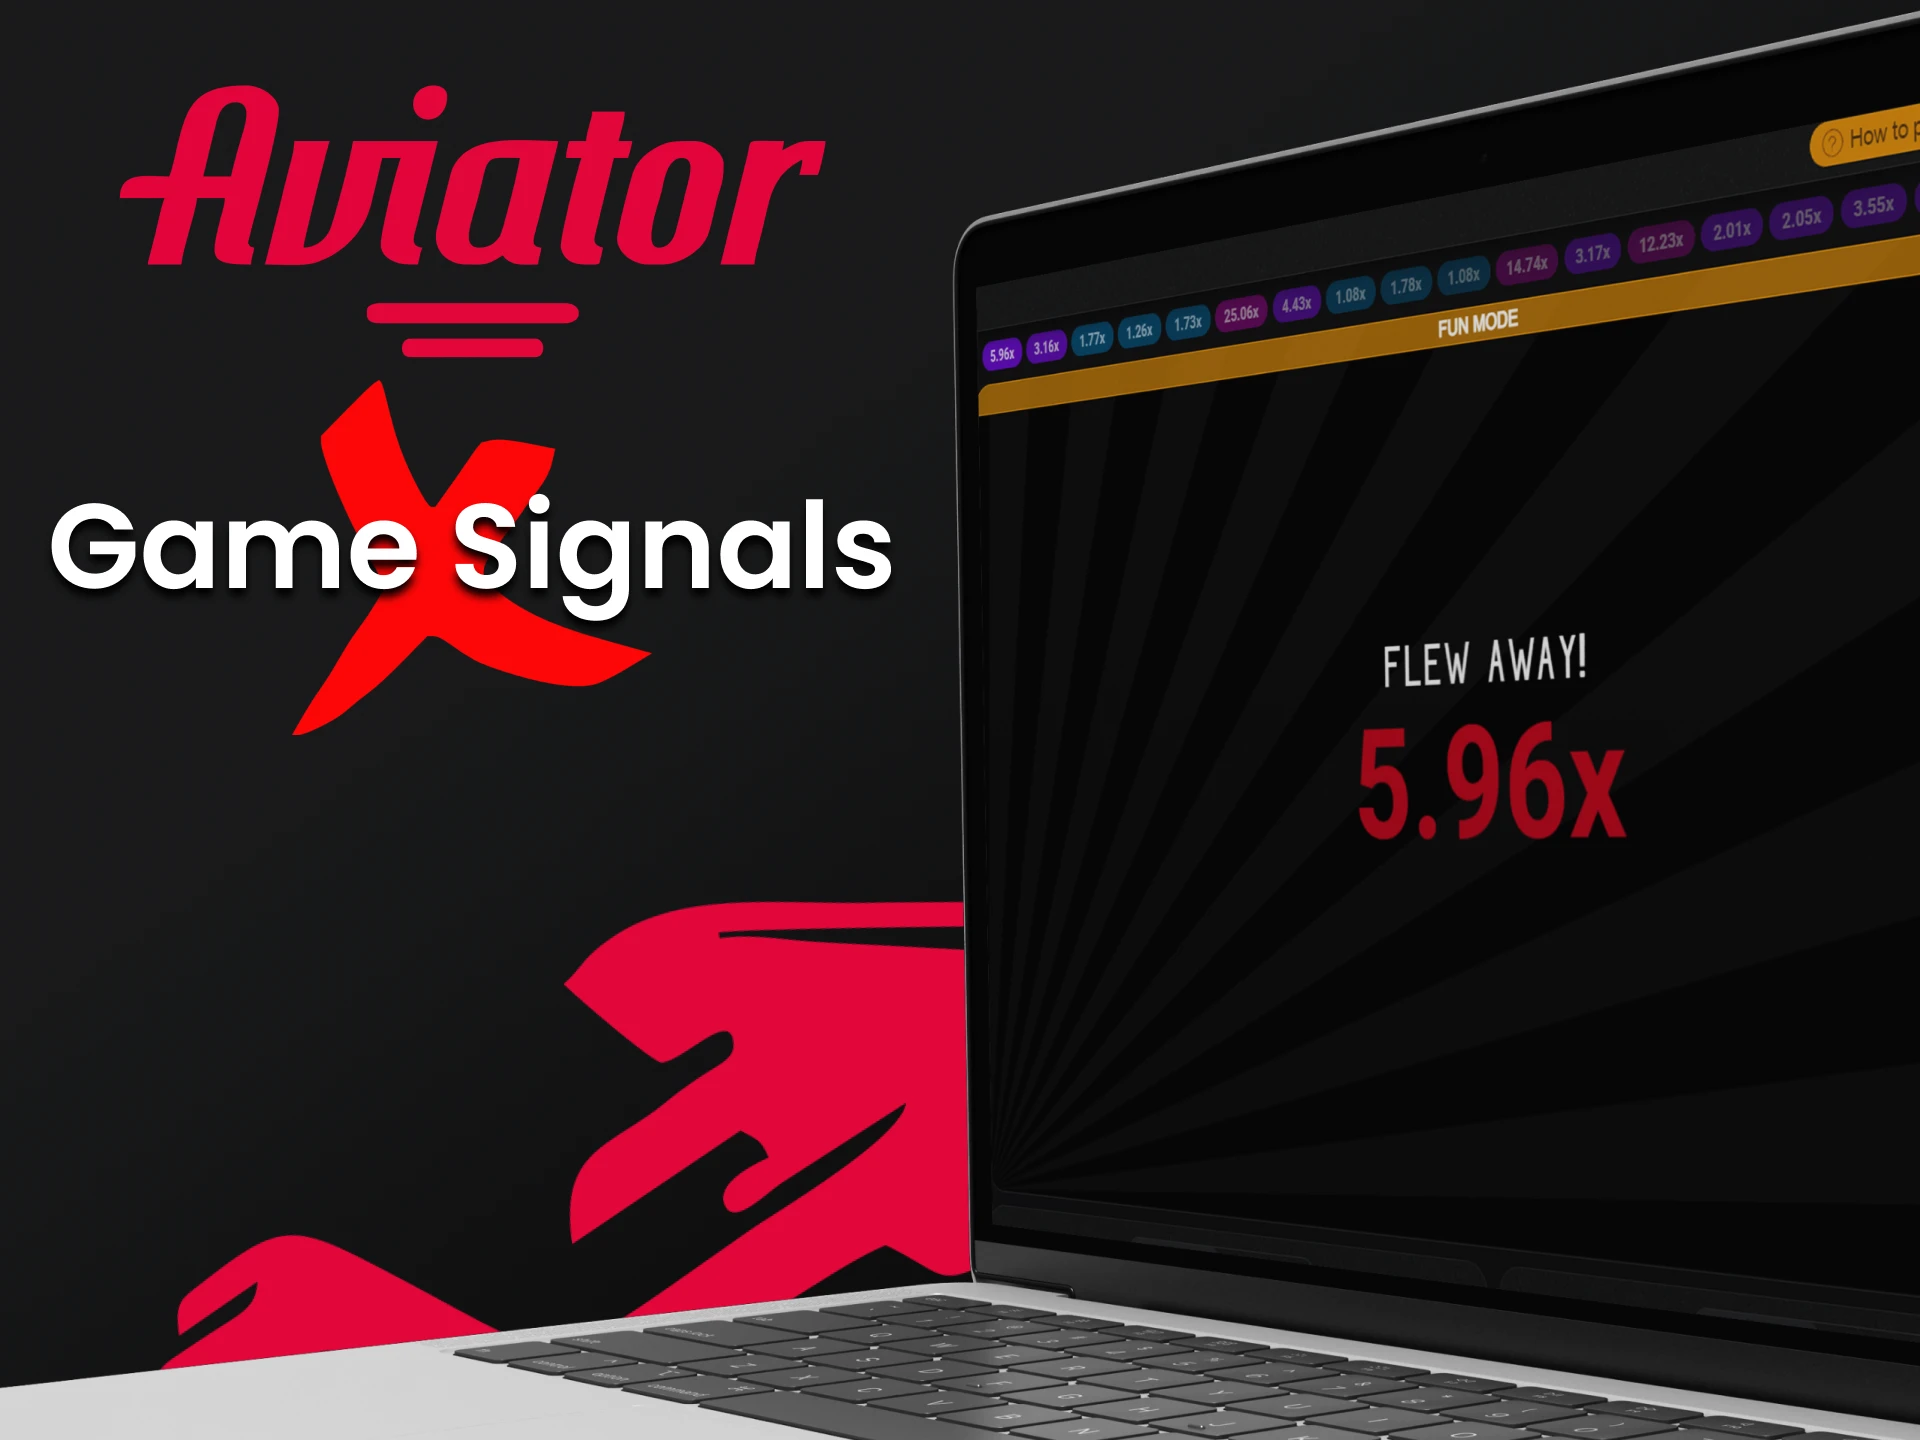 Use your own skills to earn in the Aviator game or use the signals.